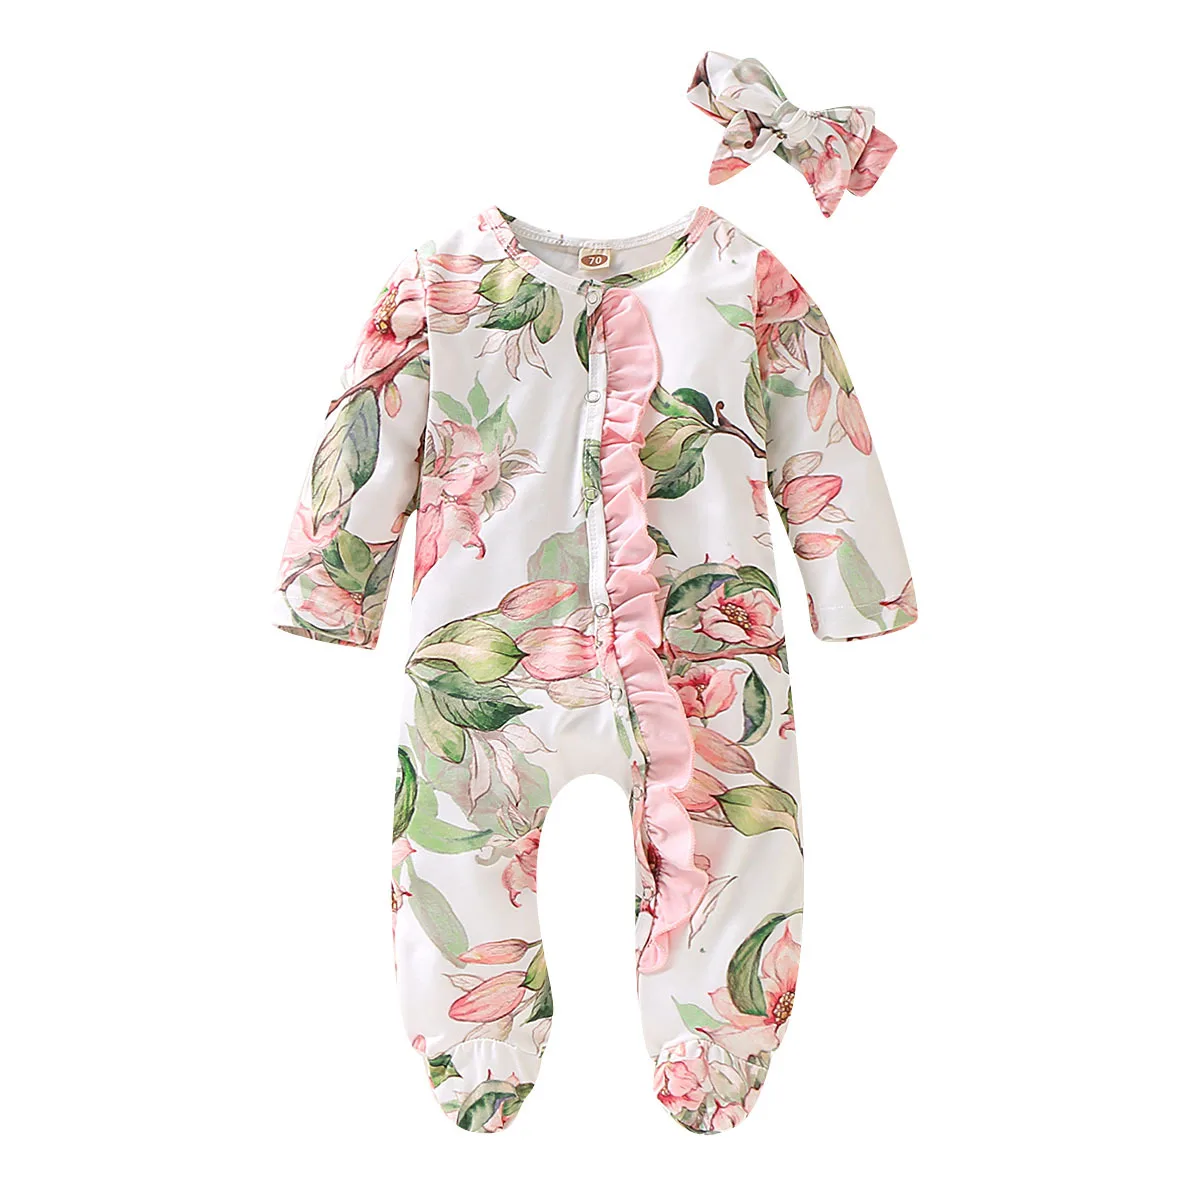 

Custom OEM ODM Newborn Infant Toddler Clothing Girls Long Sleeve Floral Ruffle Footie Sleeper Romper Baby Footed Pajamas, Photo showed and customized color